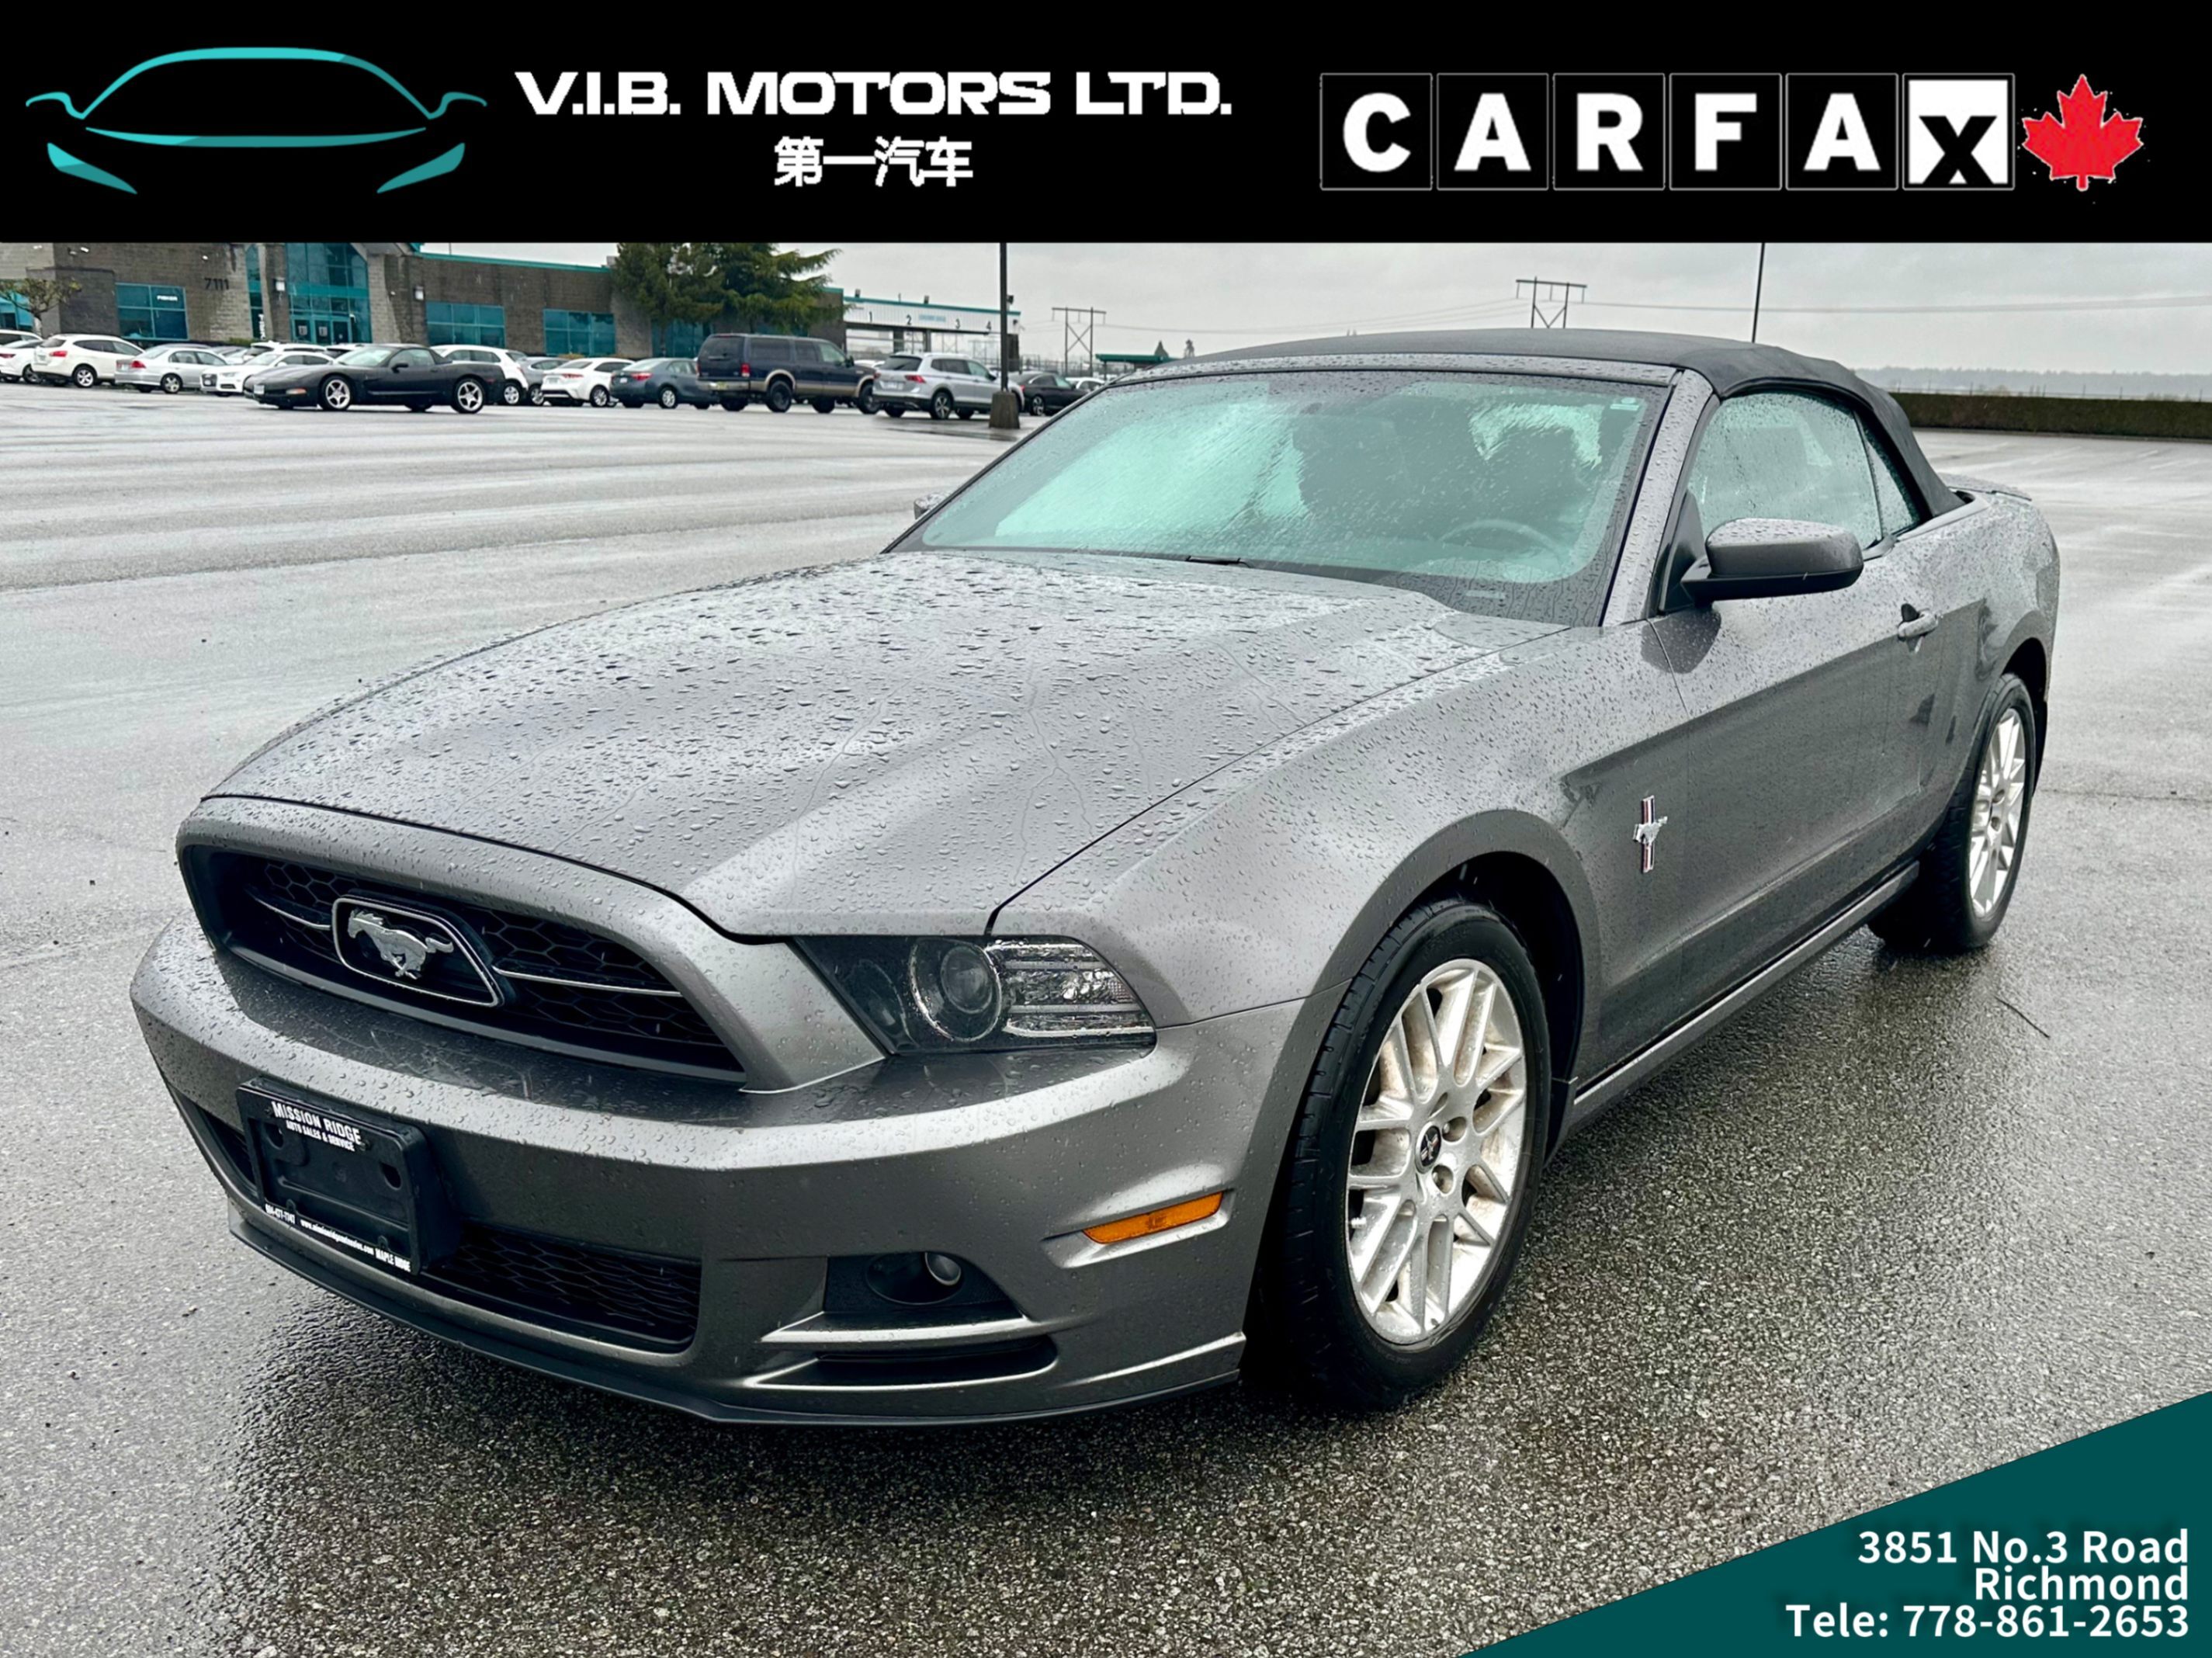 2014 Ford Mustang 2dr Conv V6 Premium/ 0 Accident/ BC LOCAL/ LEATHER